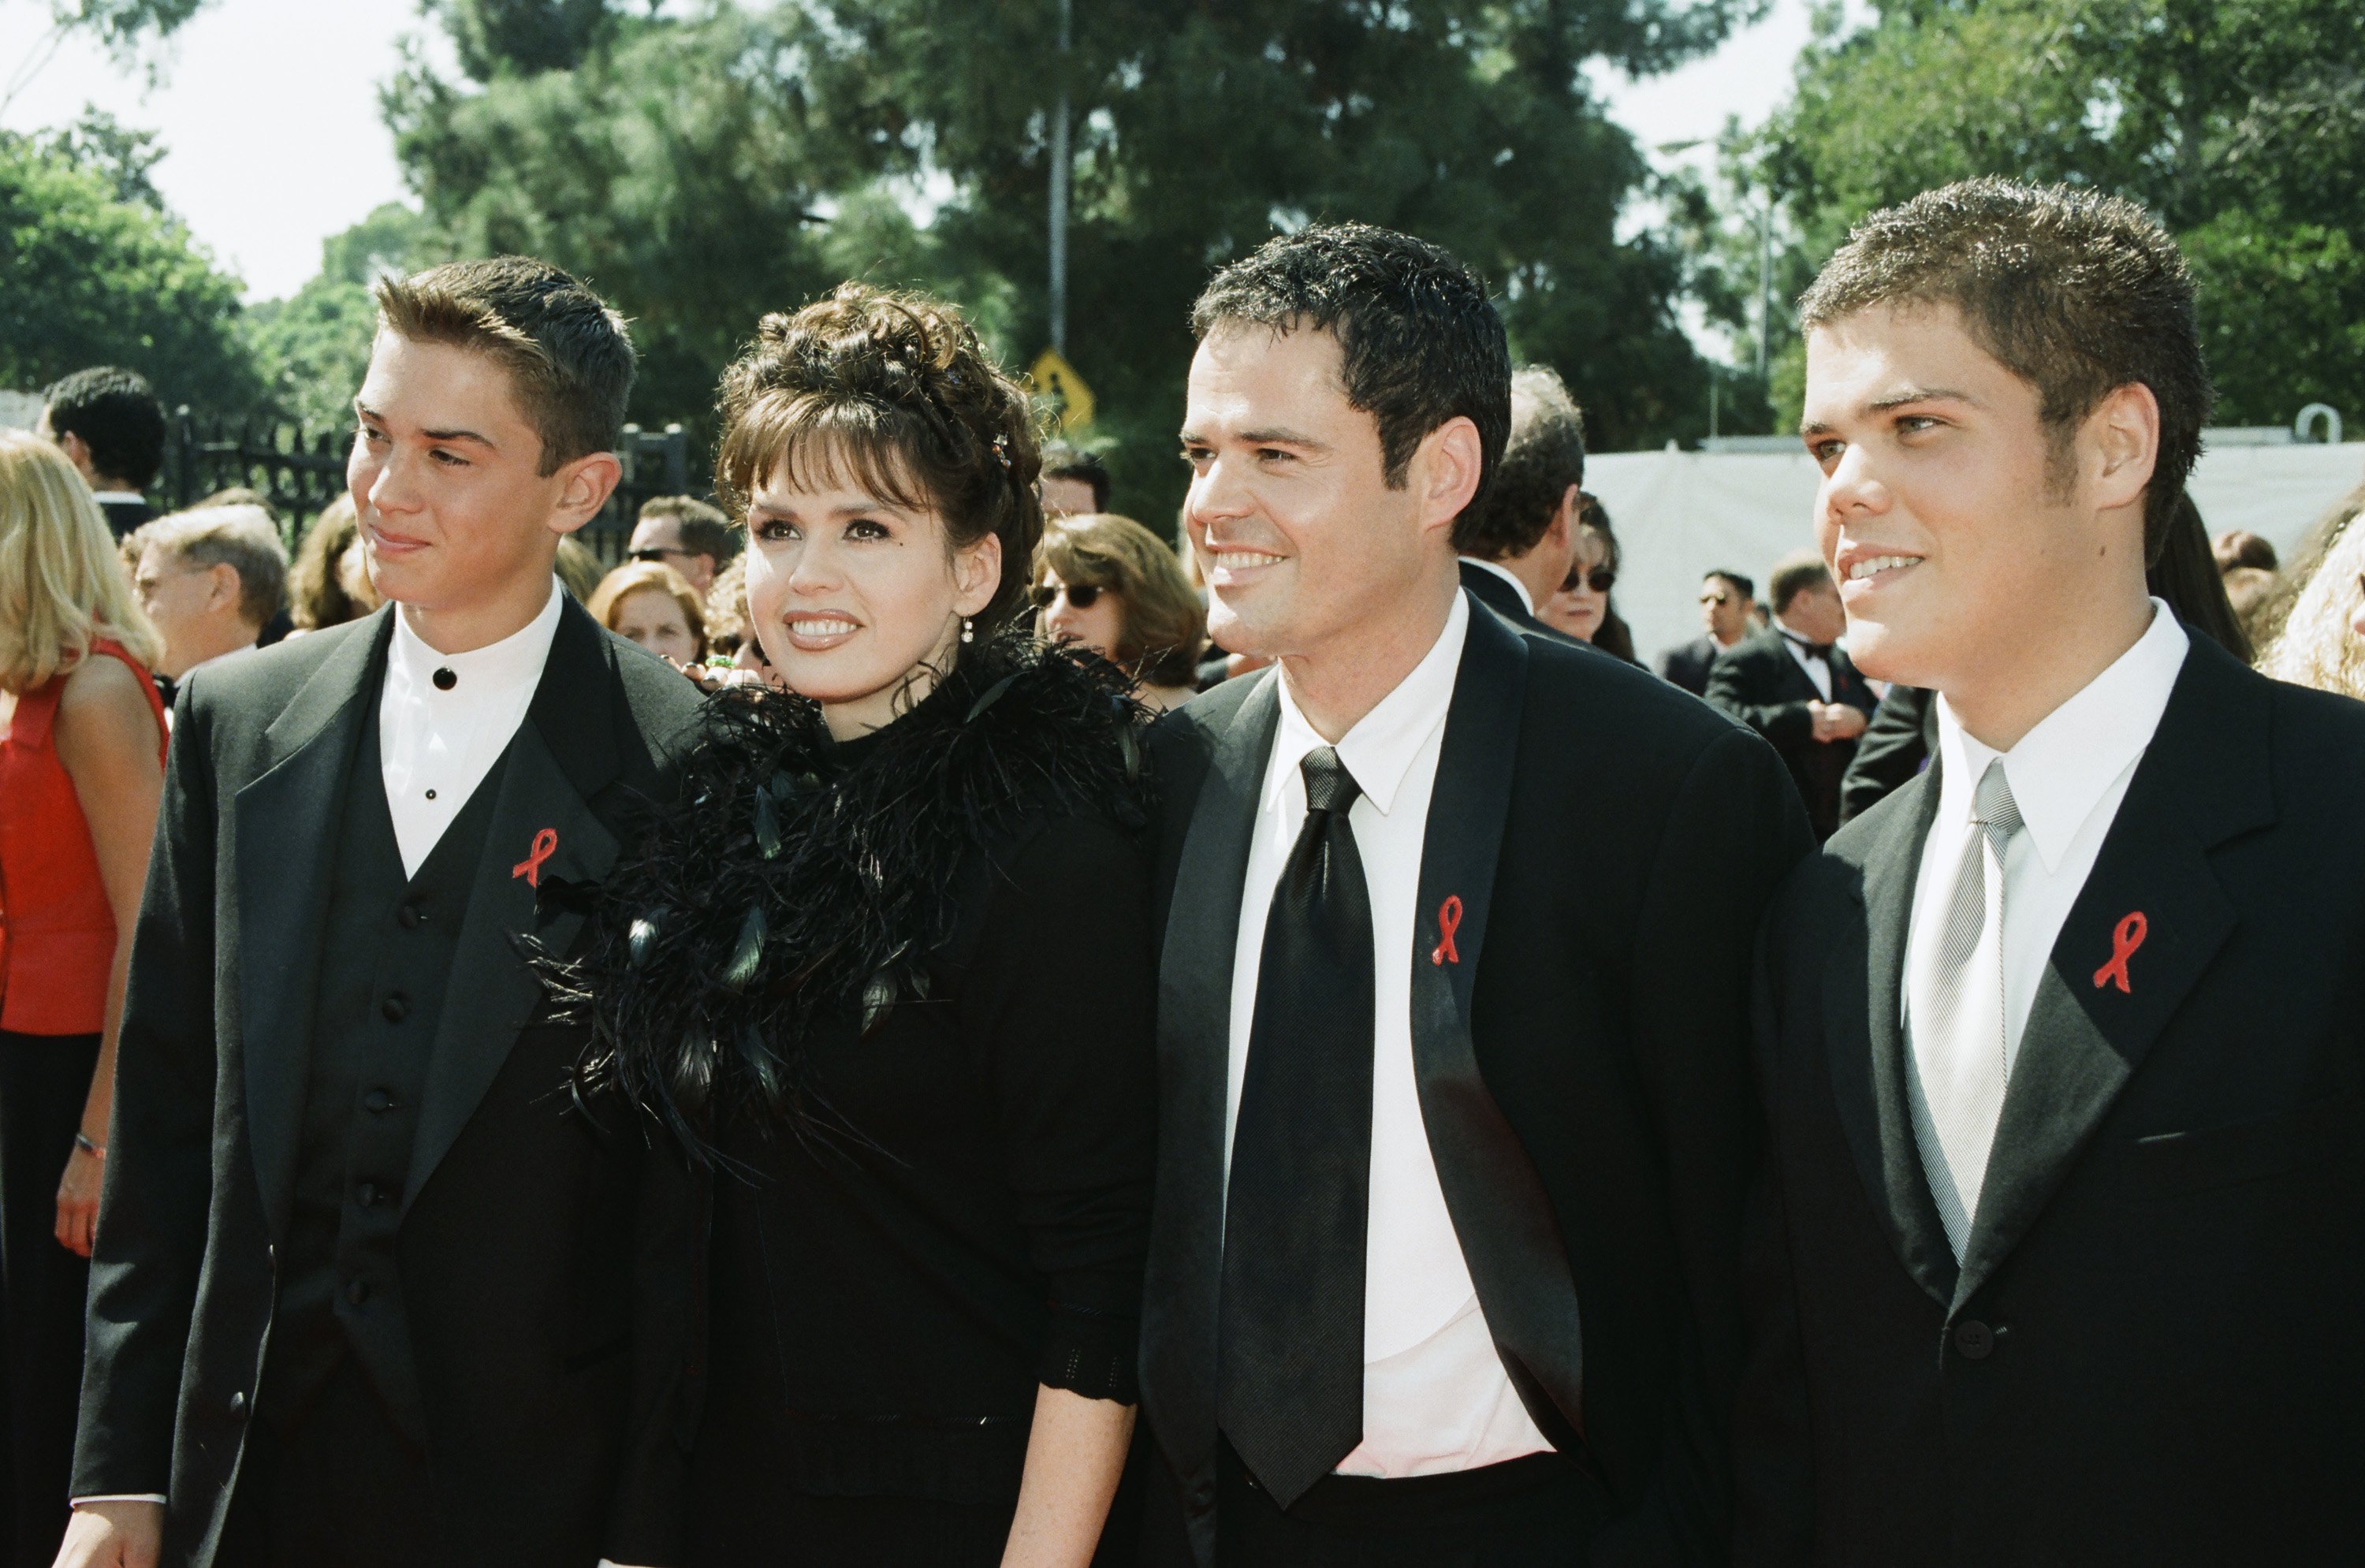 Michael Blosil, Marie Osmond, Donny Osmond, and Brandon Osmond at the 50th Annual Primetime Emmy Awards in Los Angeles, California on September 13, 1998 | Source: Getty Images